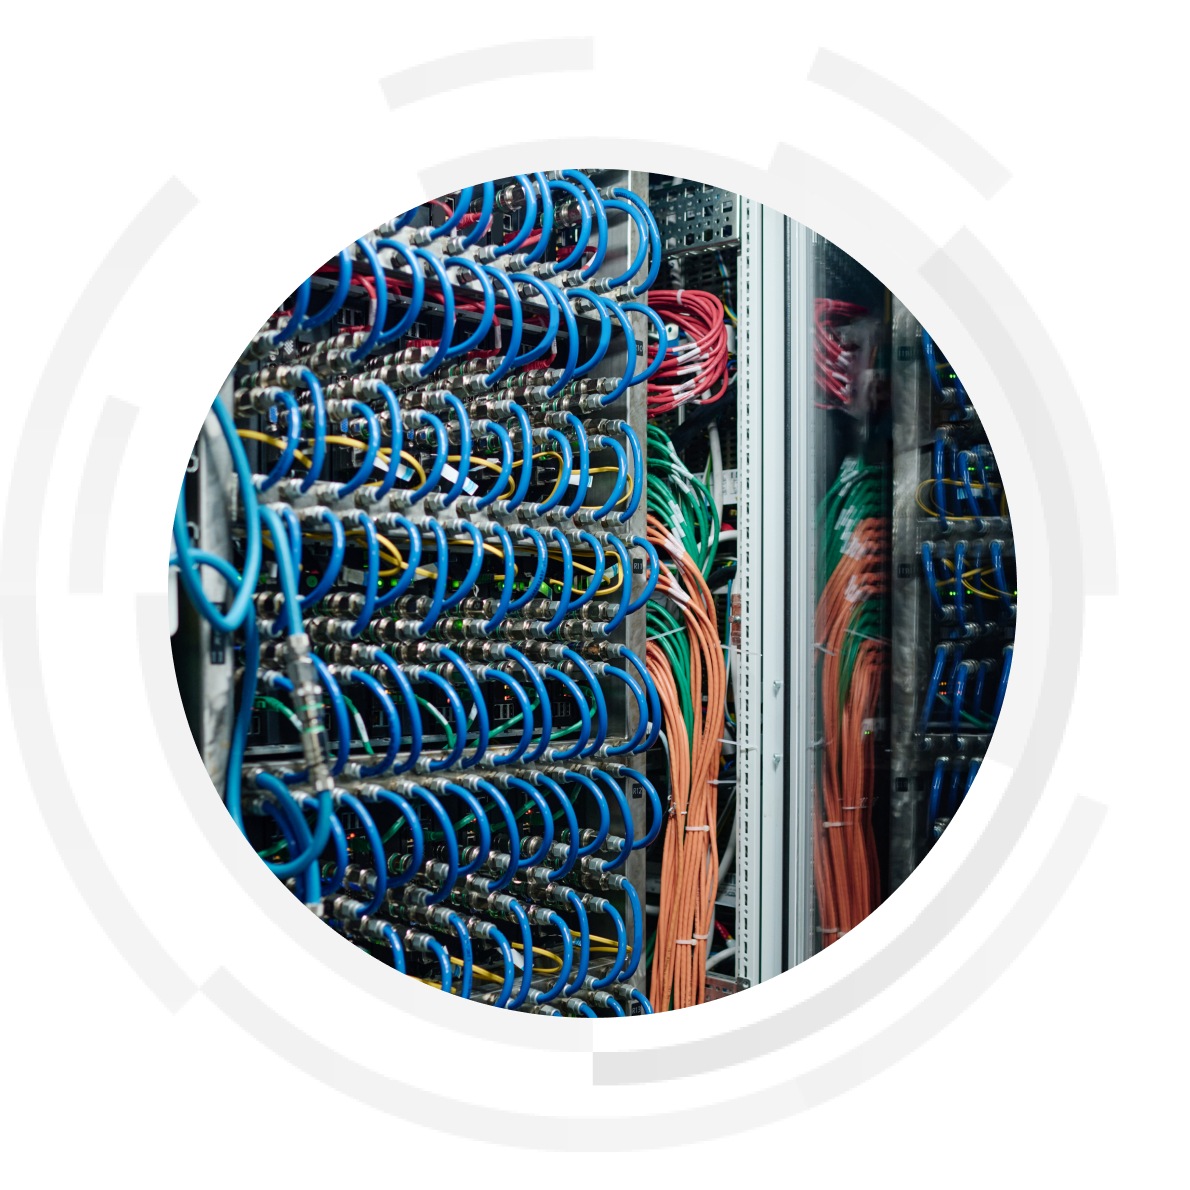 Server cables in a data centre, network server